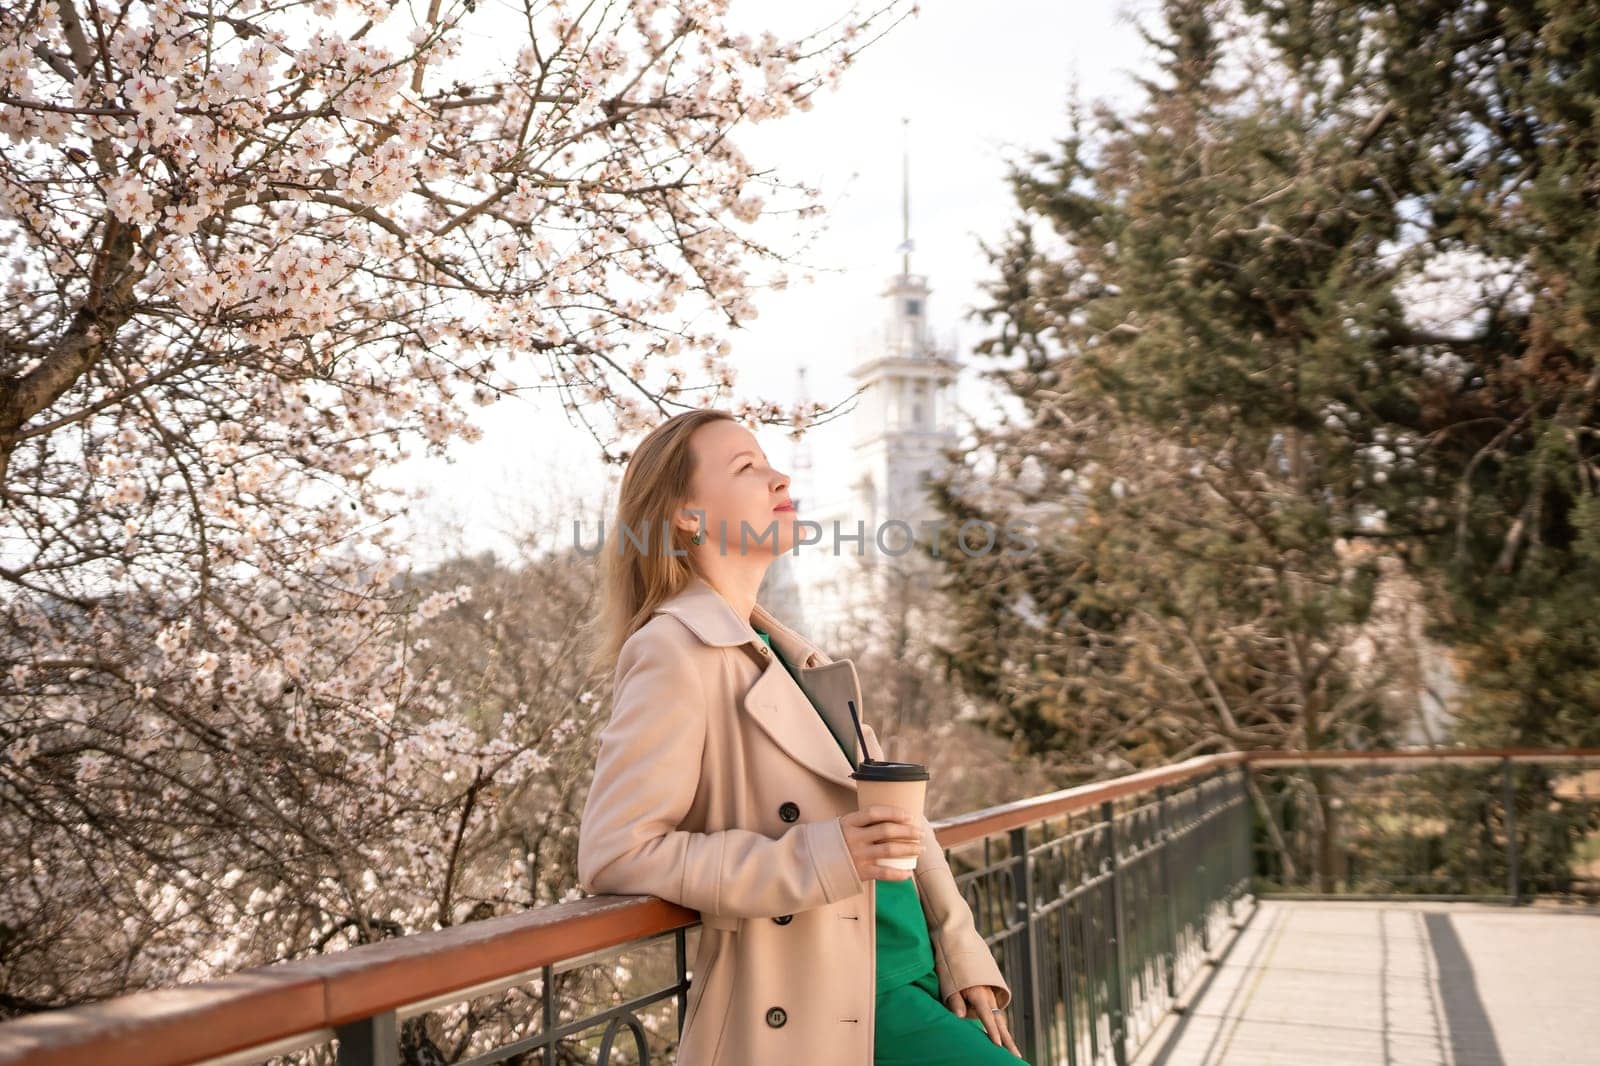 A woman is standing on a ledge with a cup of coffee in her hand. She is wearing sunglasses and a tan coat. The scene is set in a park with cherry blossoms in bloom. The woman is enjoying the view